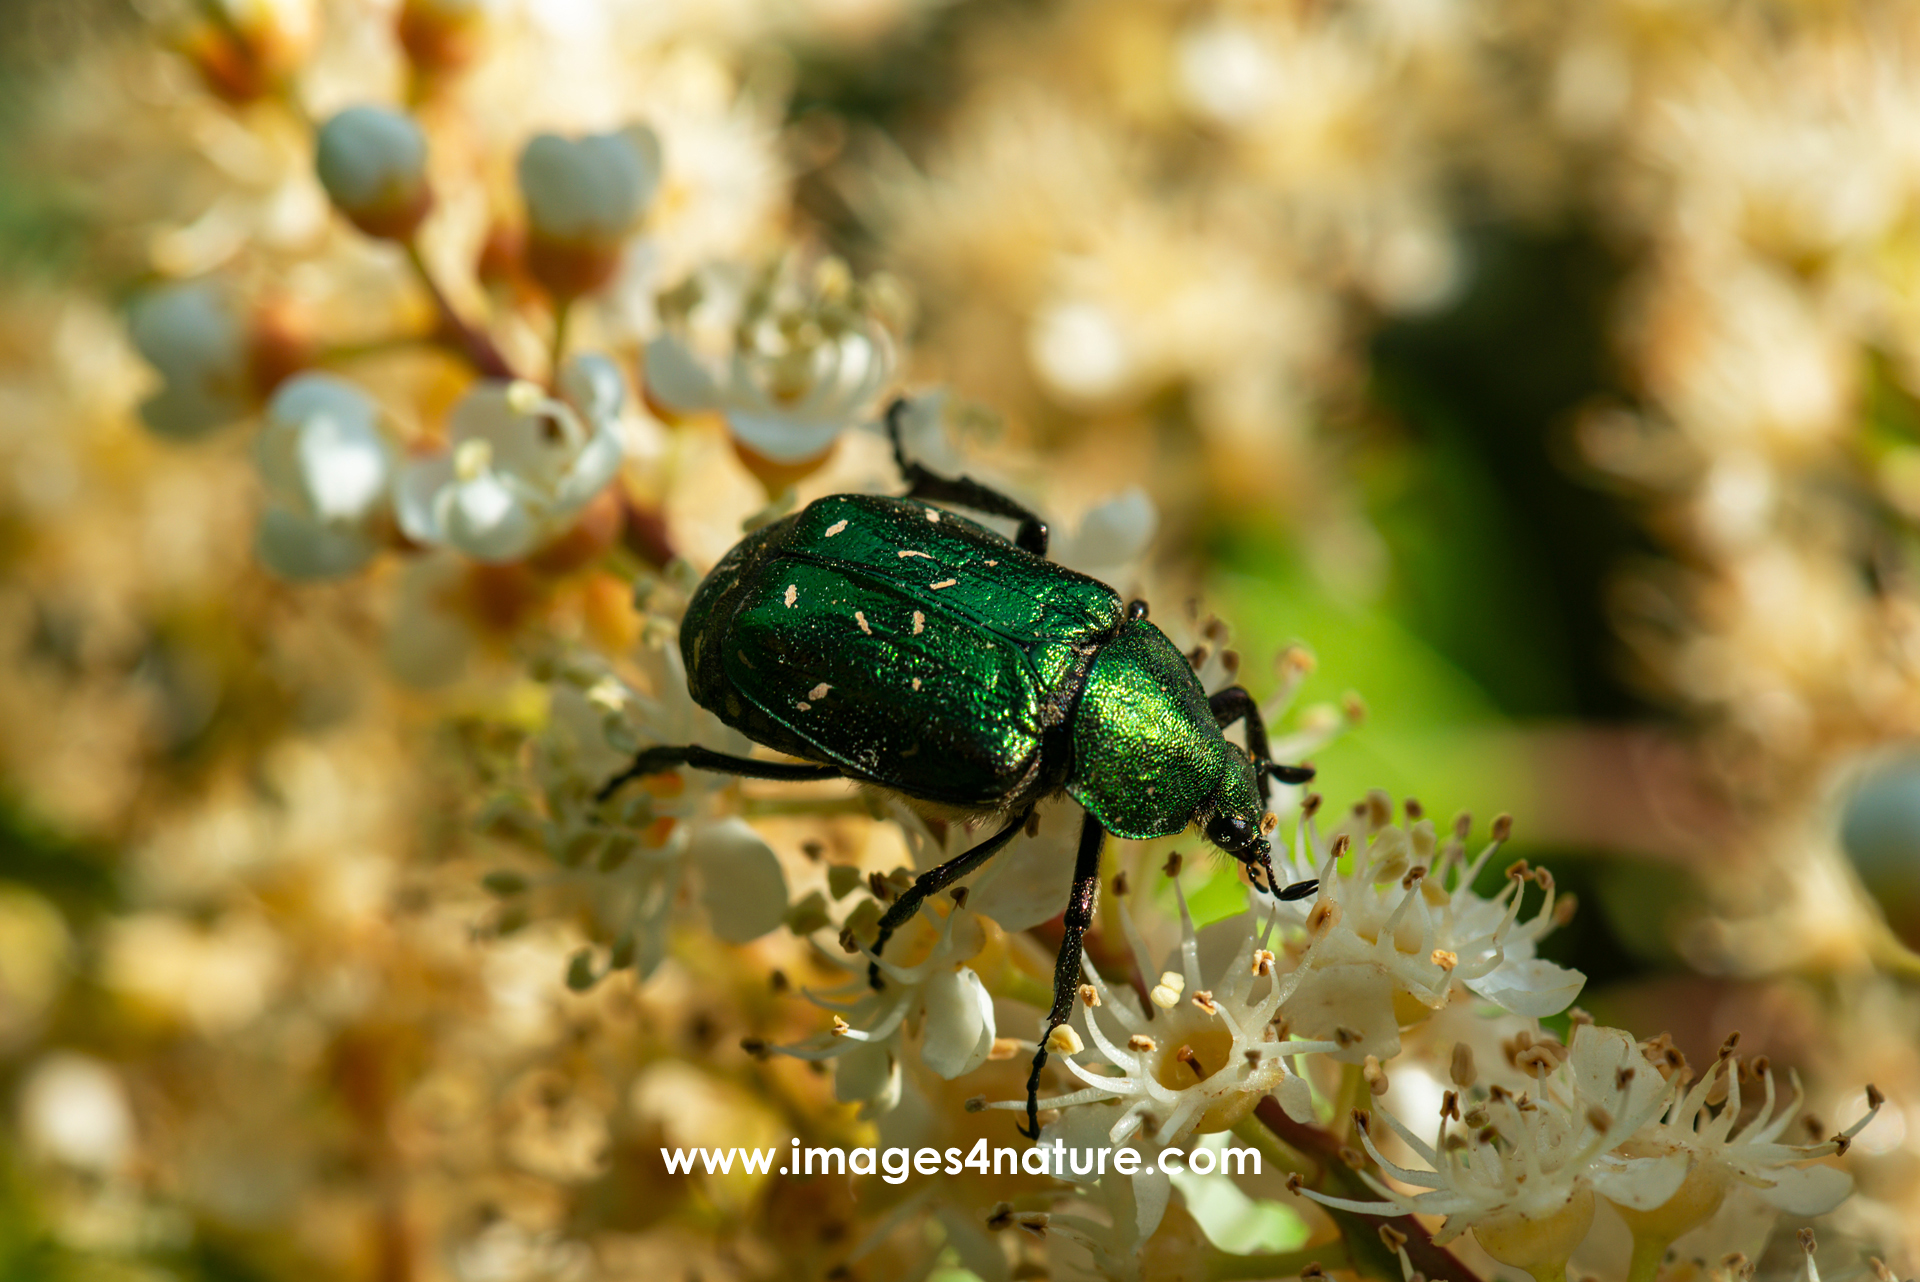 A beautiful metallic green colored beetle walking on top of the blooming white and yellow flowers of a cherry laurel plant